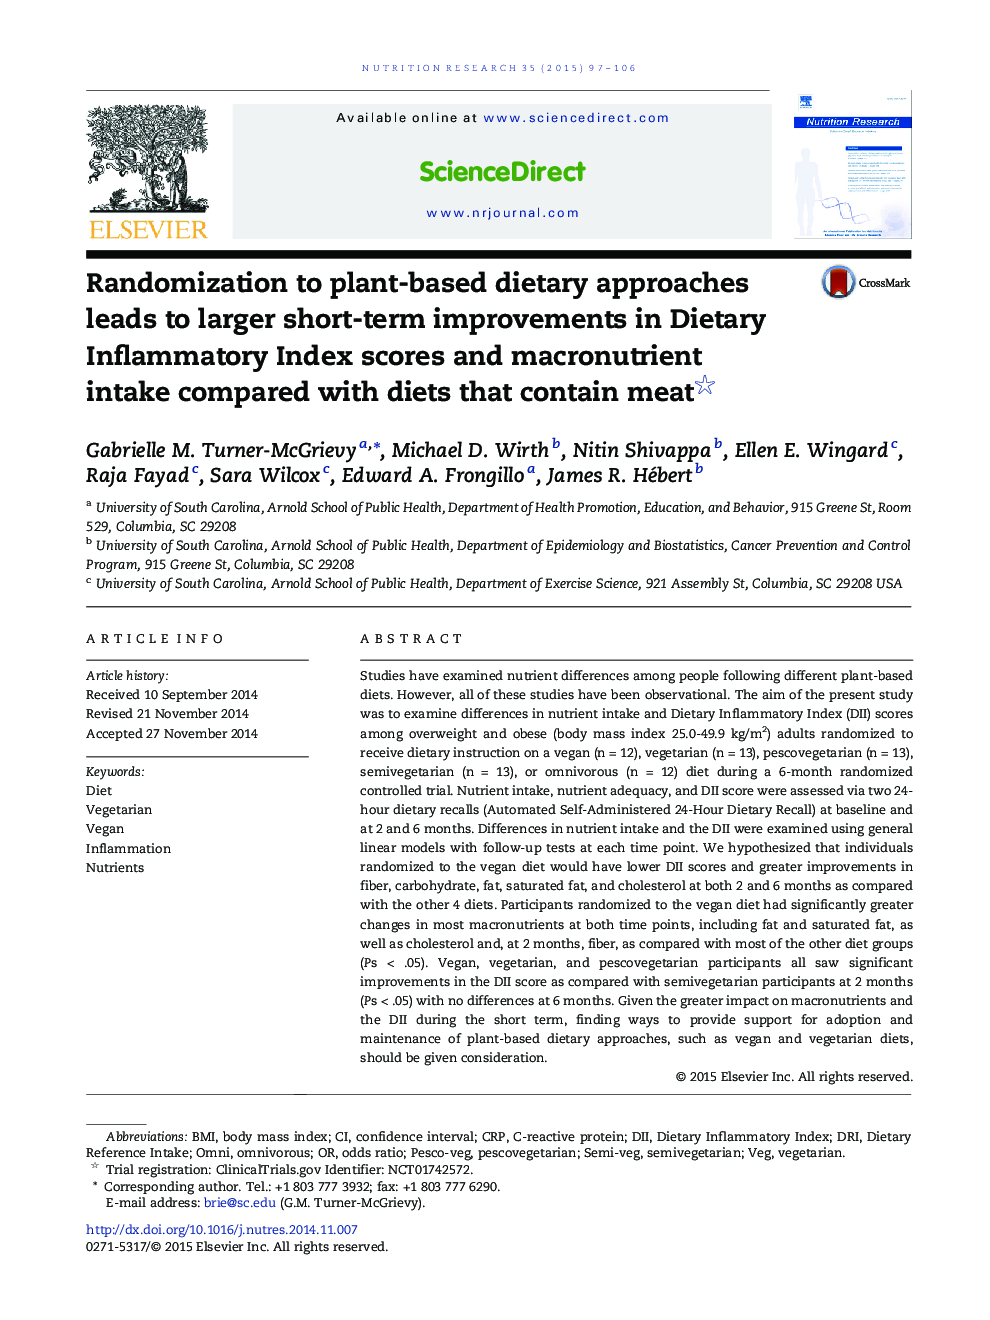 Randomization to plant-based dietary approaches leads to larger short-term improvements in Dietary Inflammatory Index scores and macronutrient intake compared with diets that contain meat